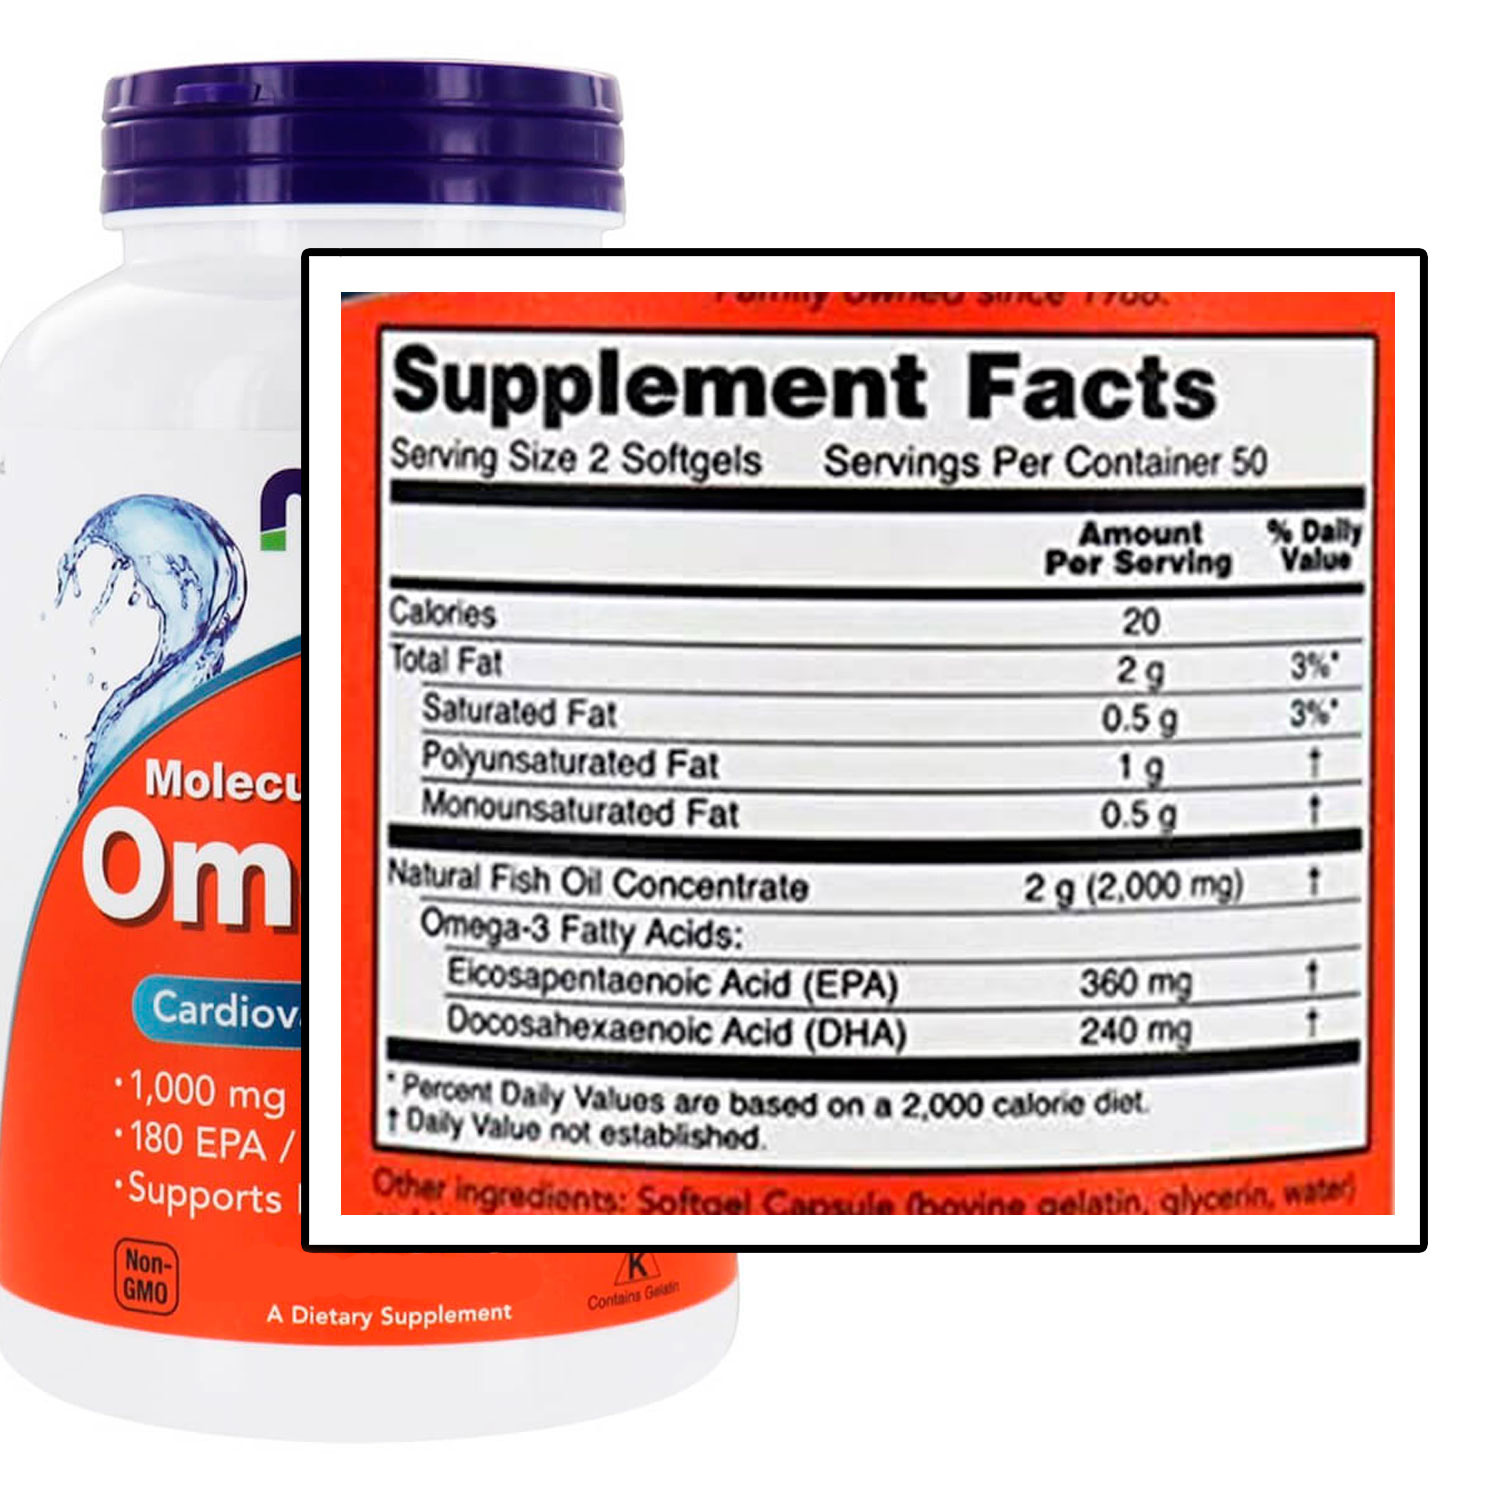 tabela_nutricional_omega3_now_home_muscle_suplementos